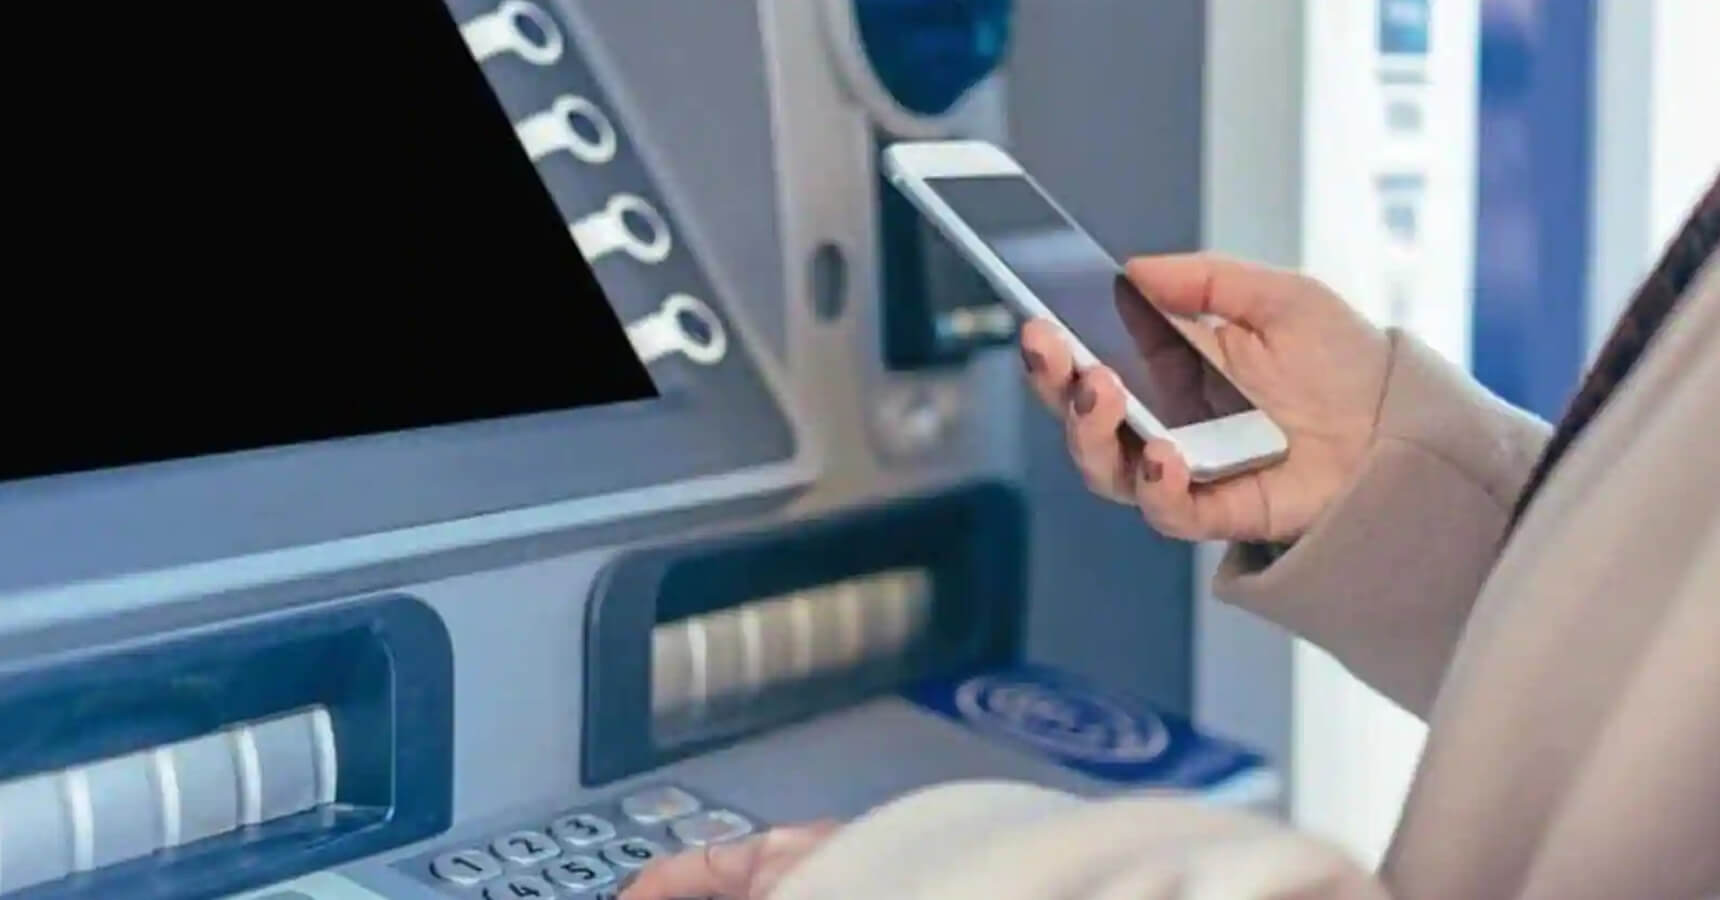 How Withdraw Cash Using Smartphone